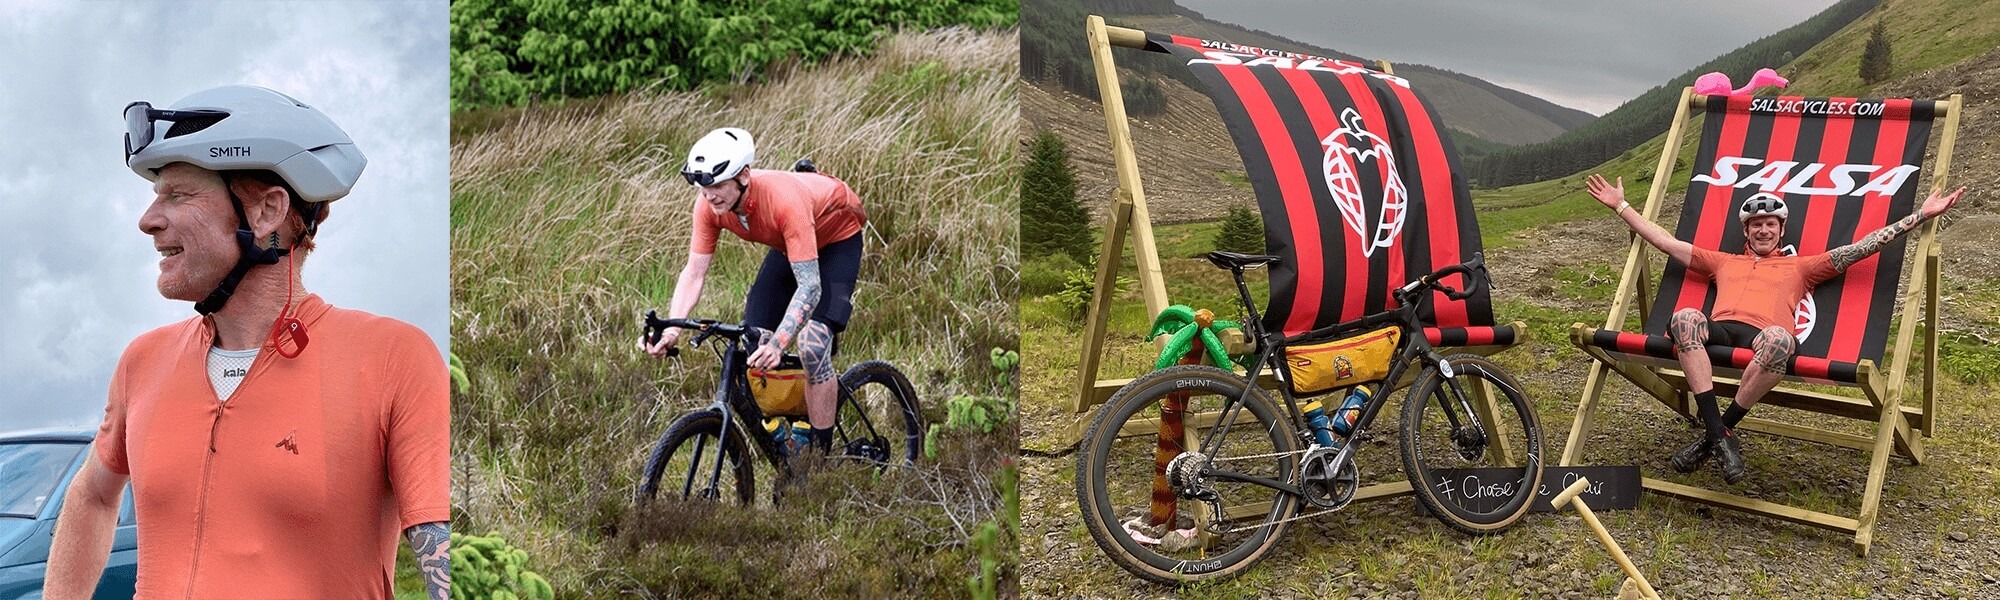 Collage of three images of Steve Bate during his cycling expedition in the Salsa Frontier 300 in the UK.